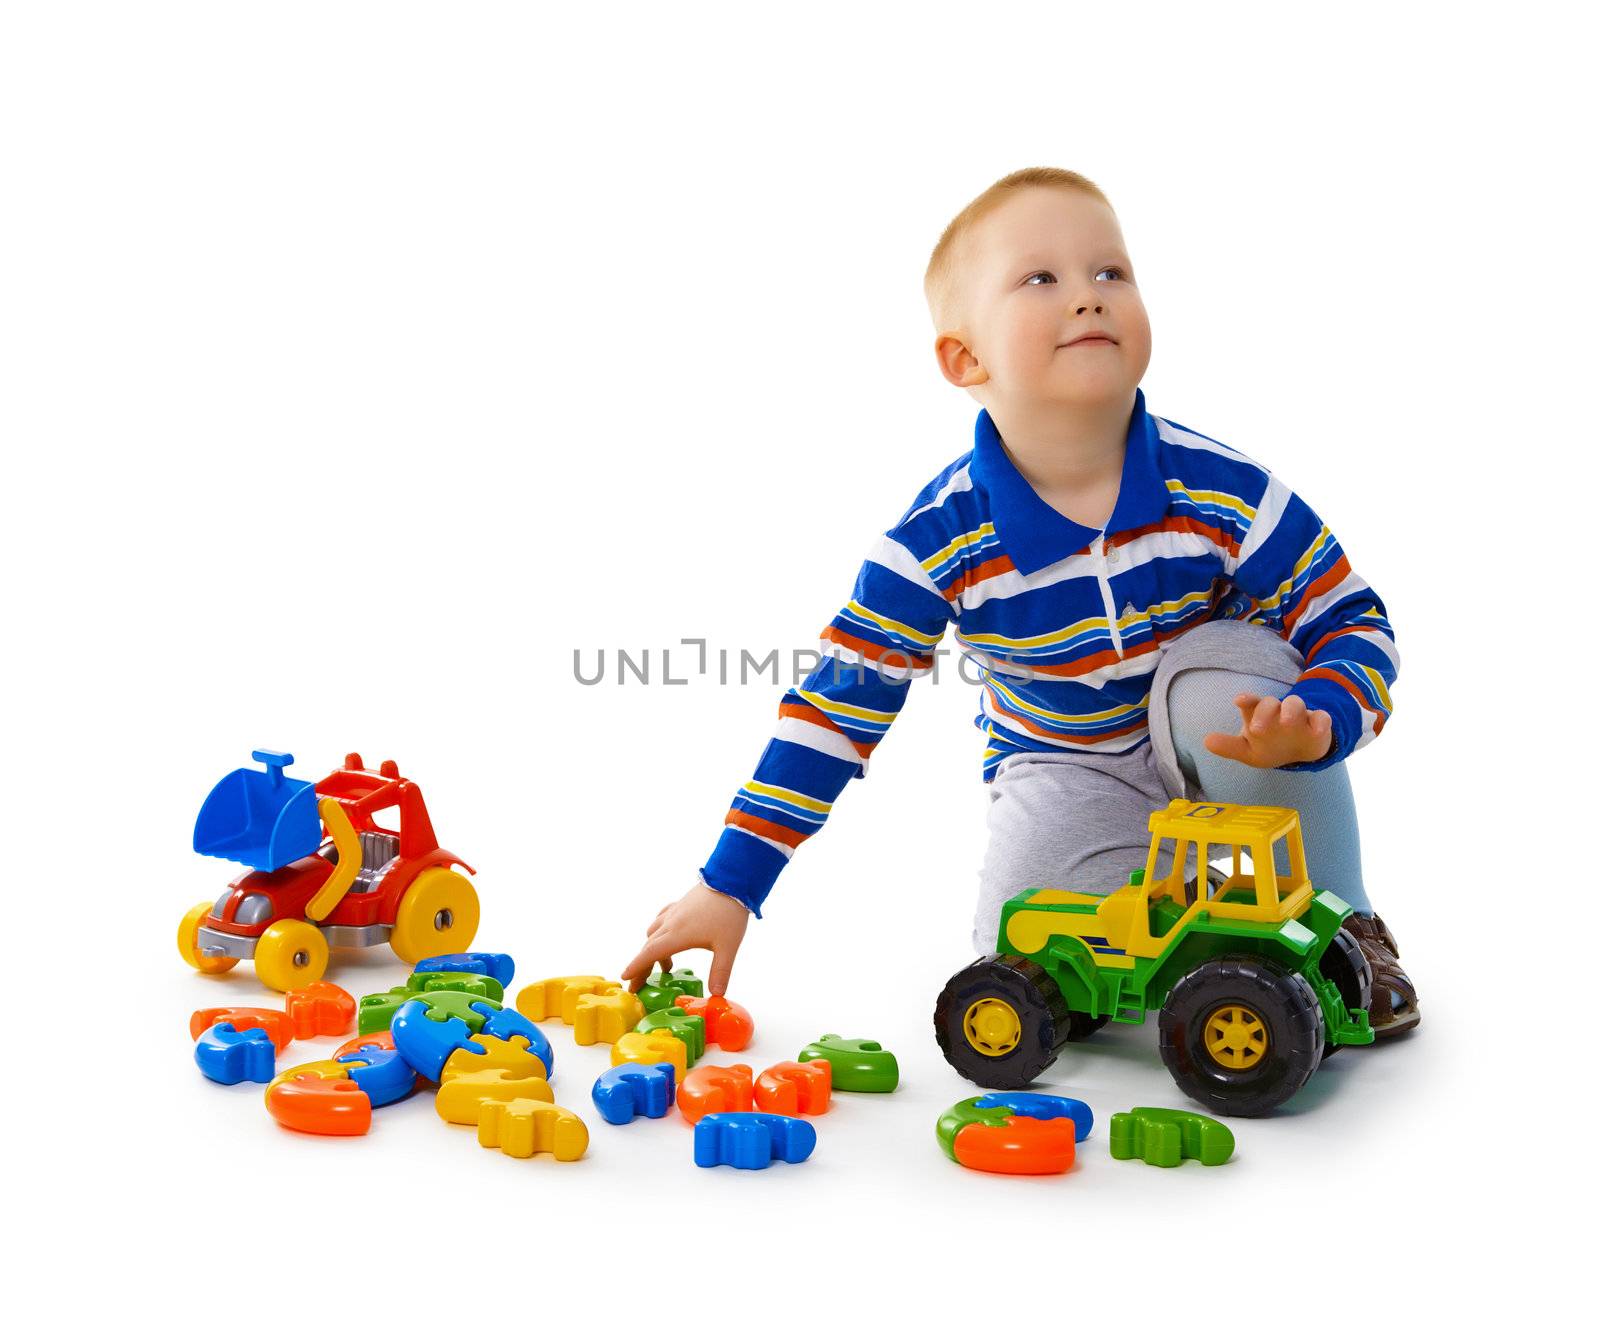 Little boy playing with toys on the floor